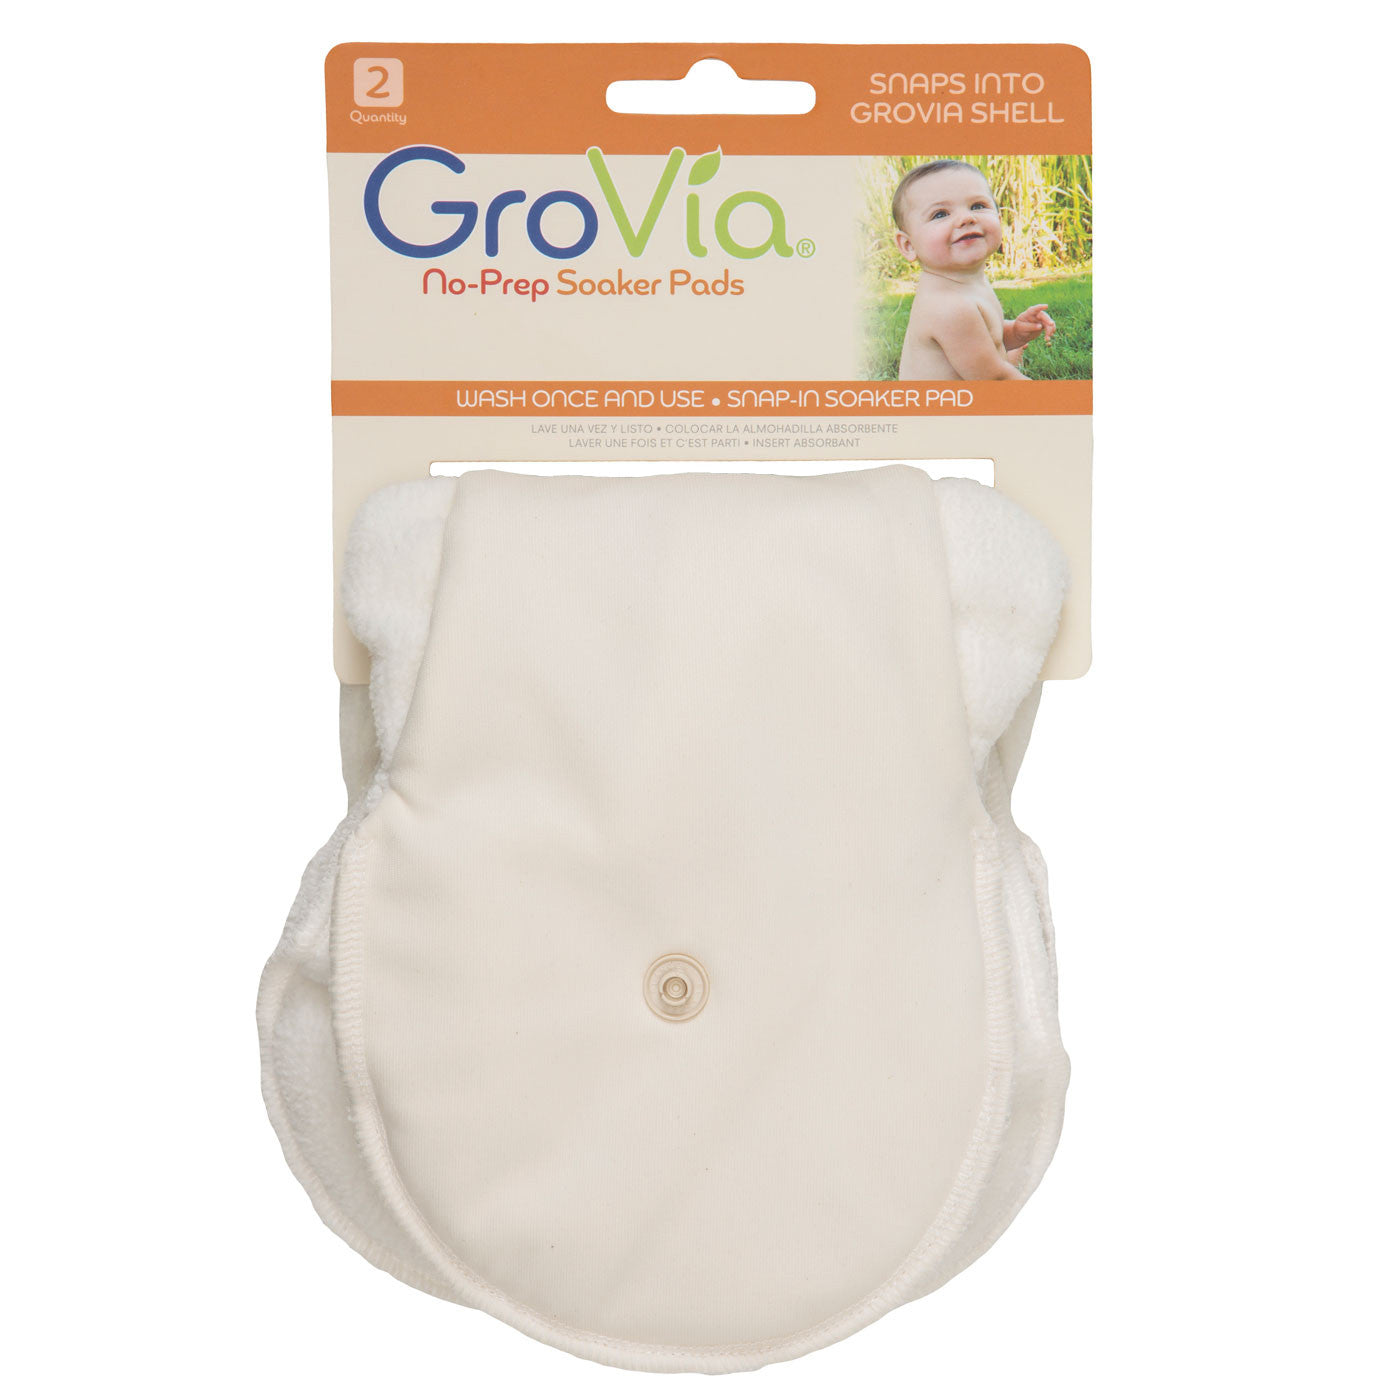 No-Prep Soaker Pads (2-pack) - Crunch Natural Parenting is where to buy